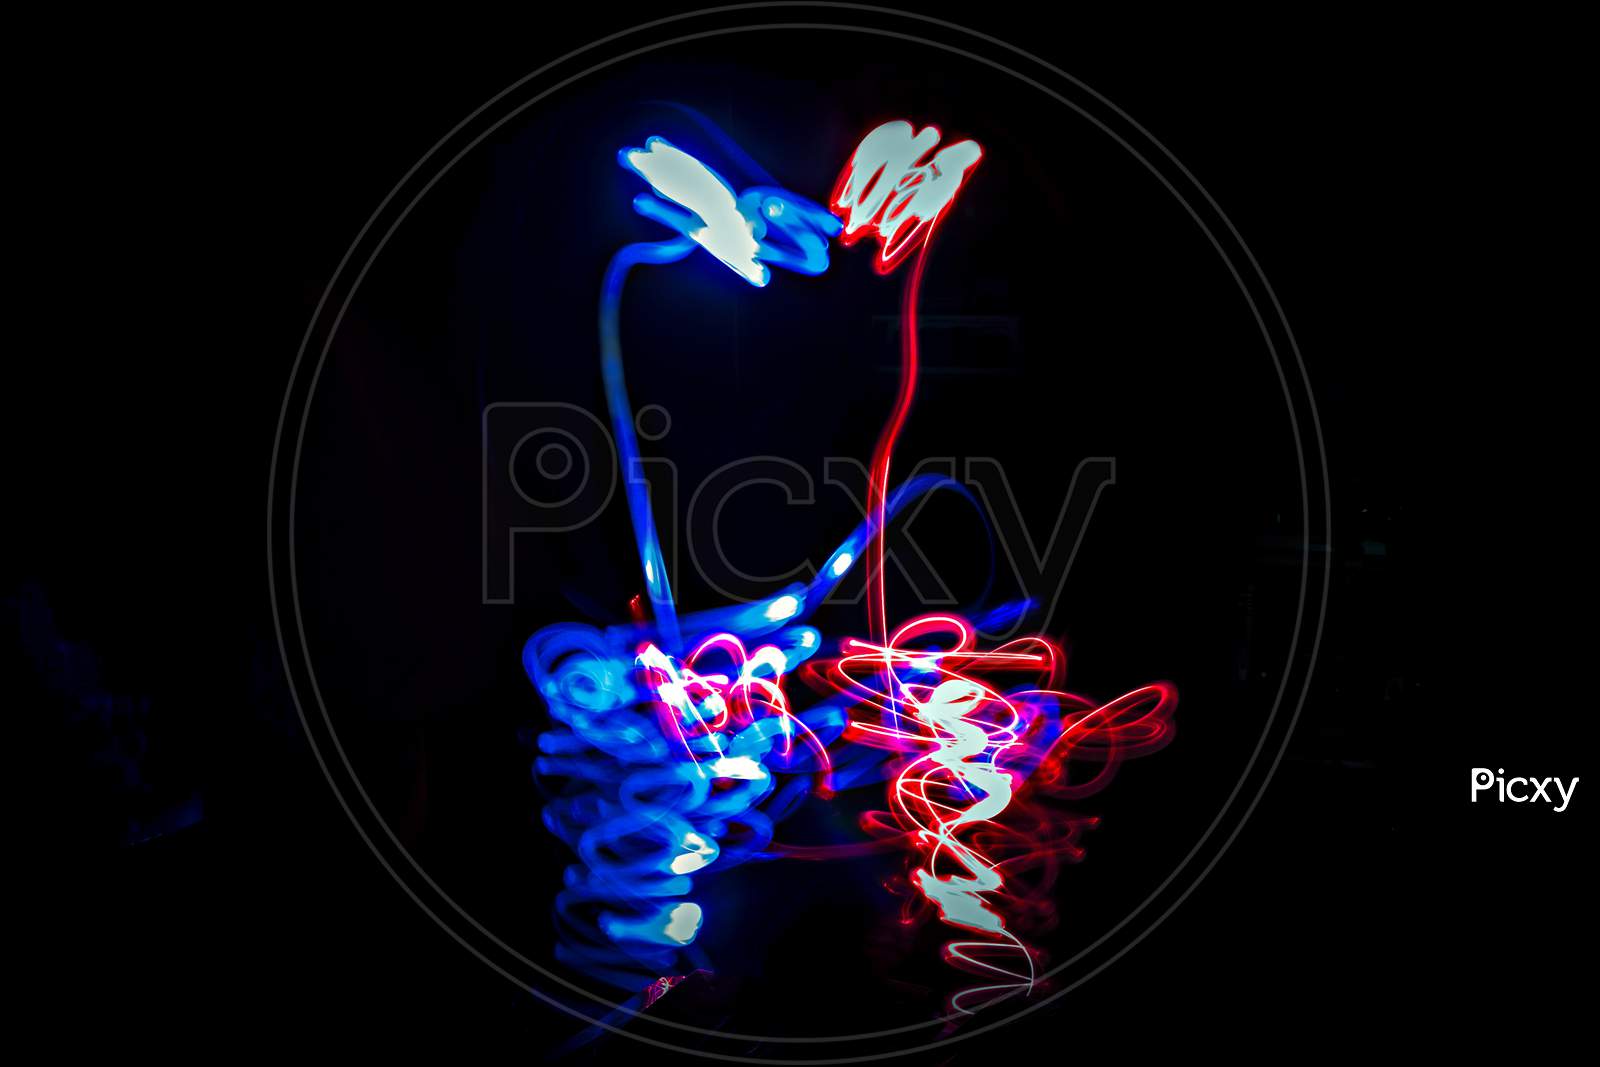 Photograph Of Abstract Light Painting Art Indicating Love.